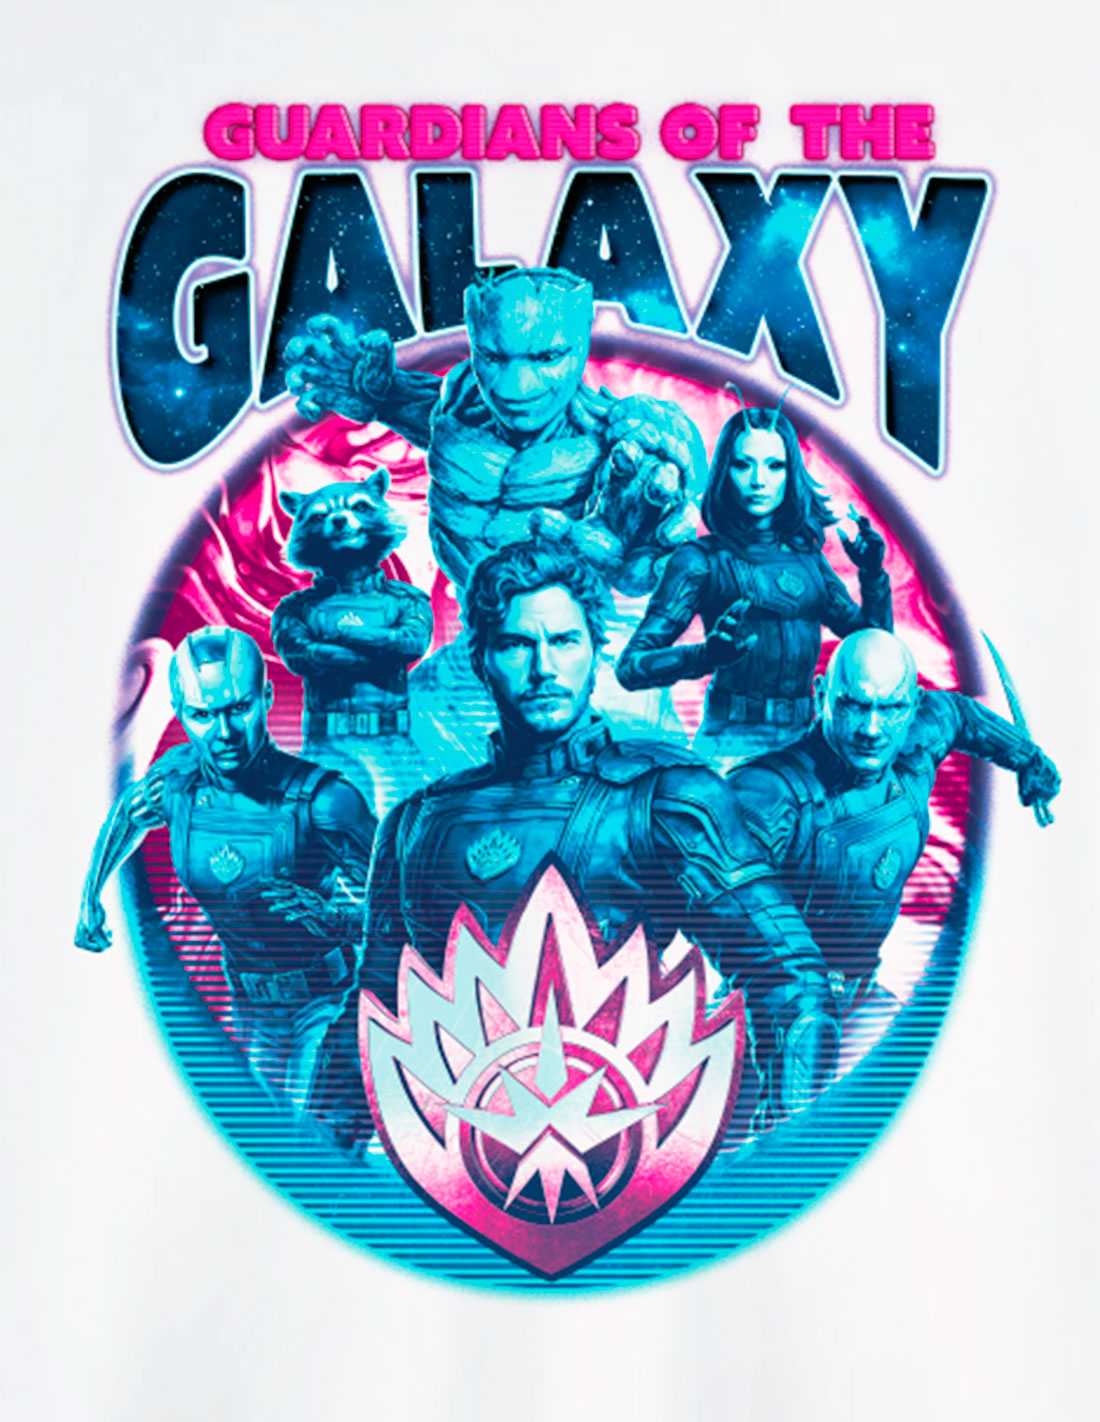 MARVEL t-shirt - Guardians of the Galaxy - Eighties Guardians